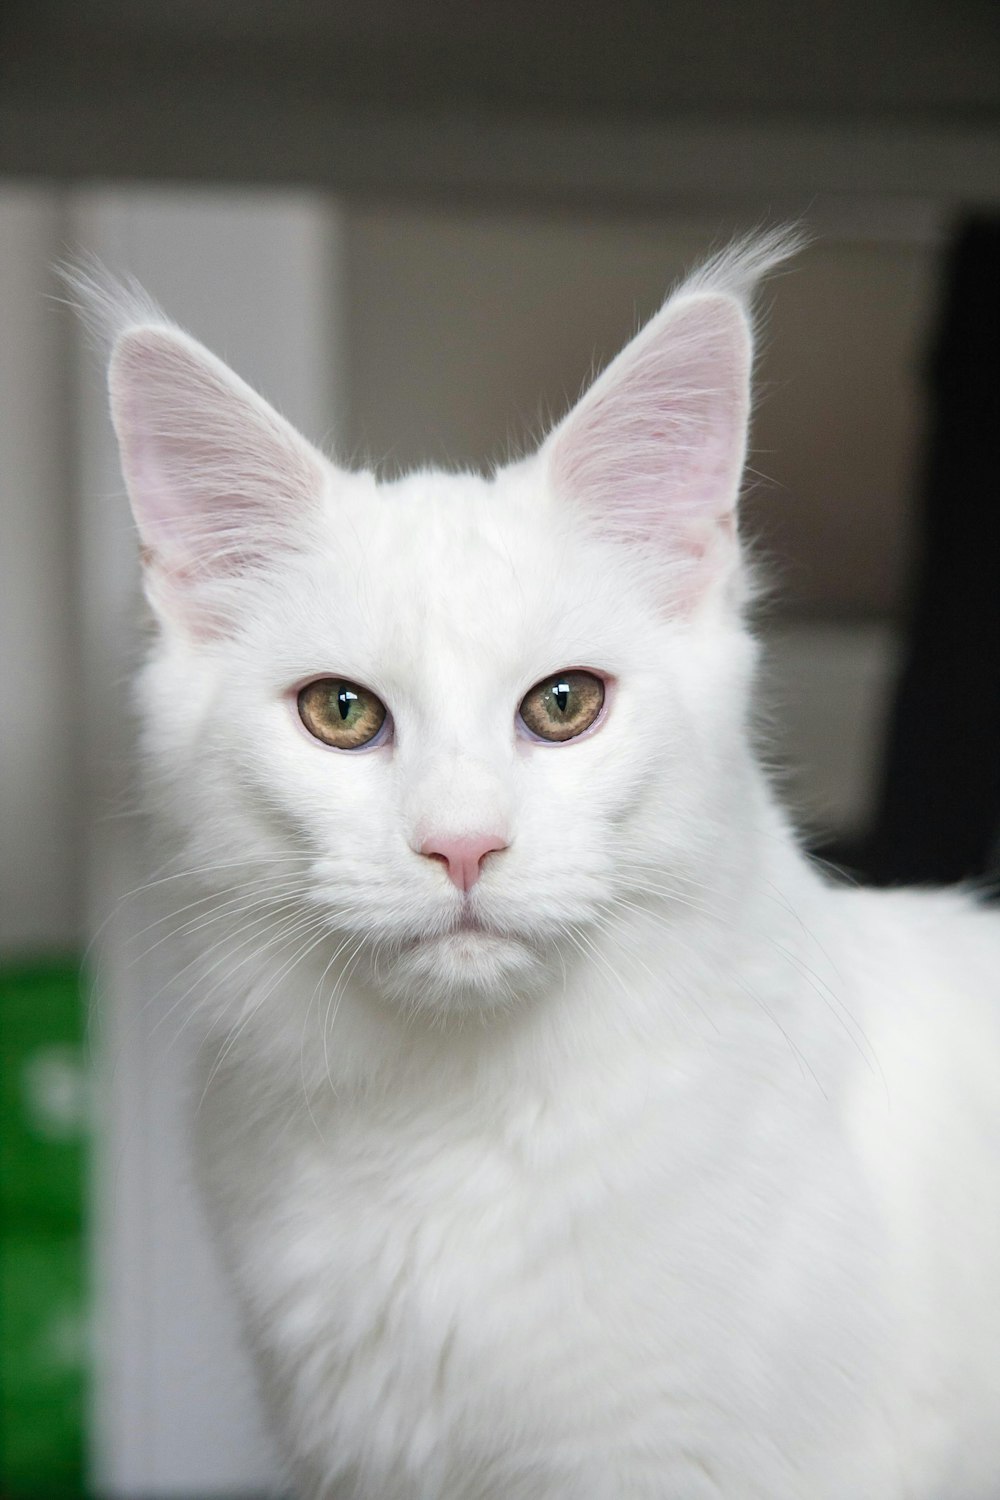 500+ White Cat Pictures [HD] | Download Free Images on Unsplash